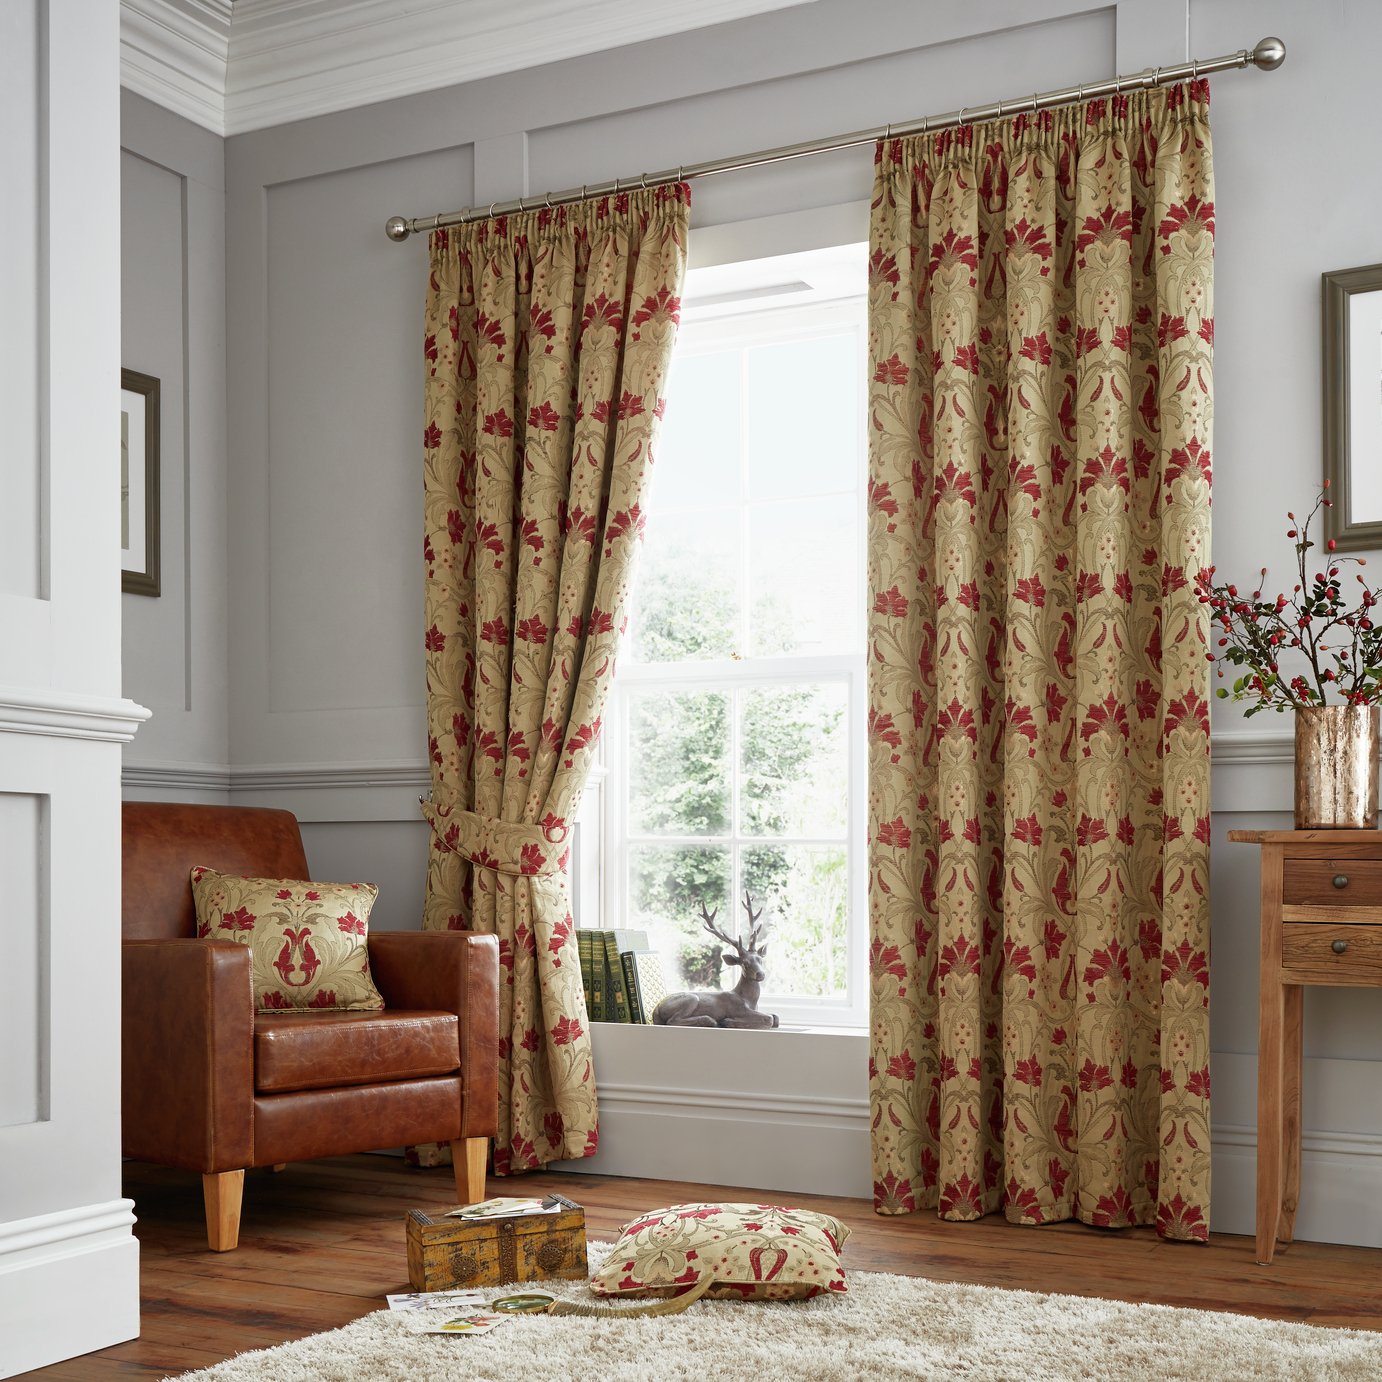 Curtina Burford Curtains - 229x330cm - Red and Gold